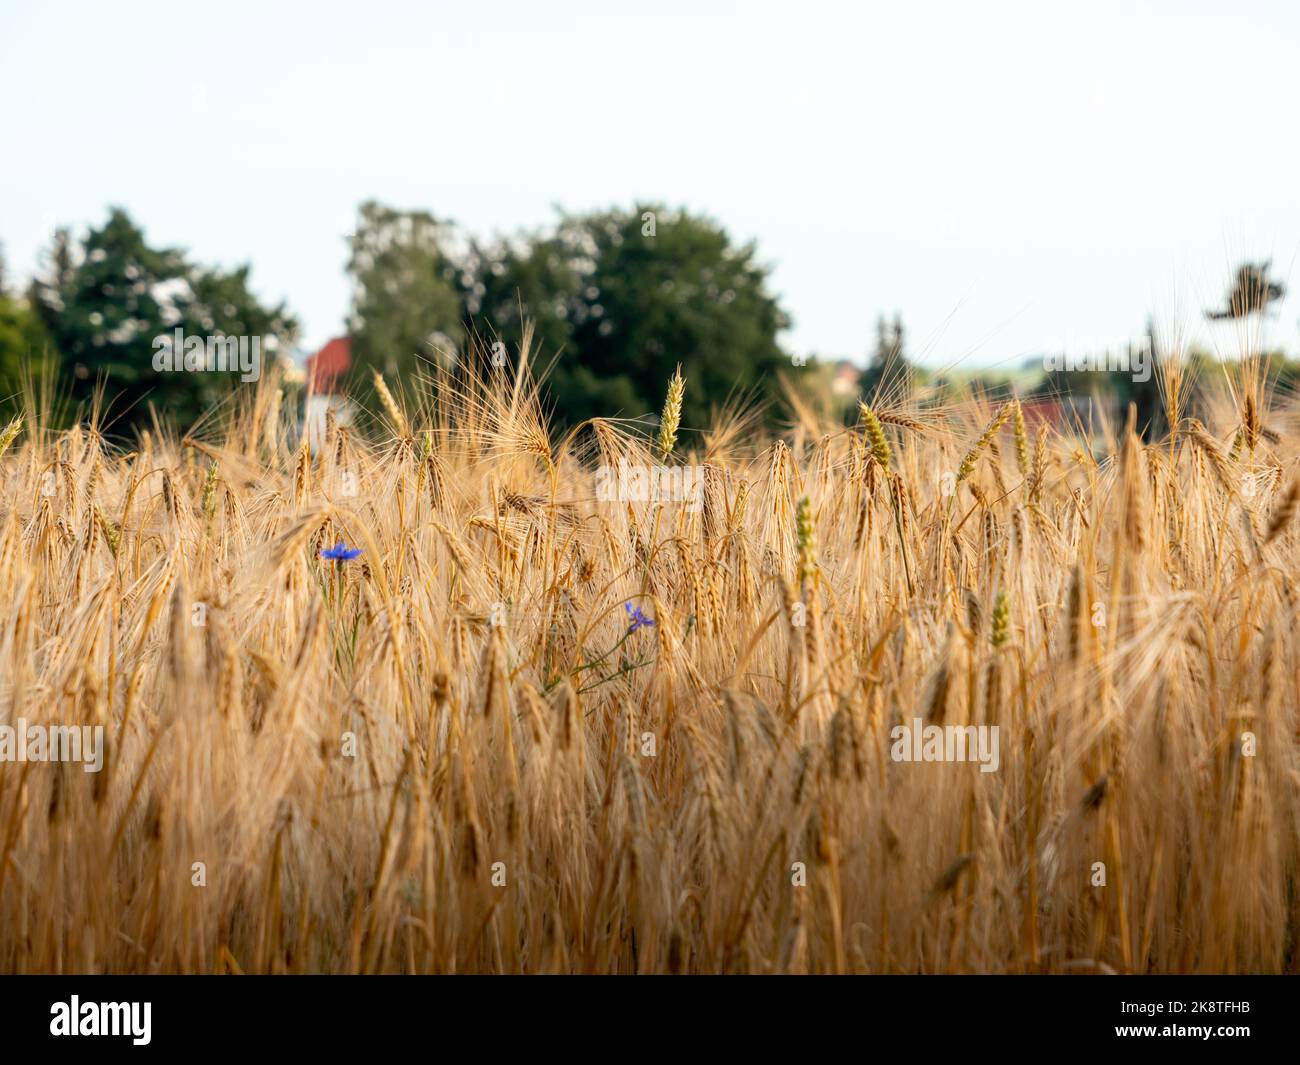 Wheat plants in an agricultural field. The golden crop is ready for the harvest. The seeds of the cereals are golden. German farming in a rural area. Stock Photo